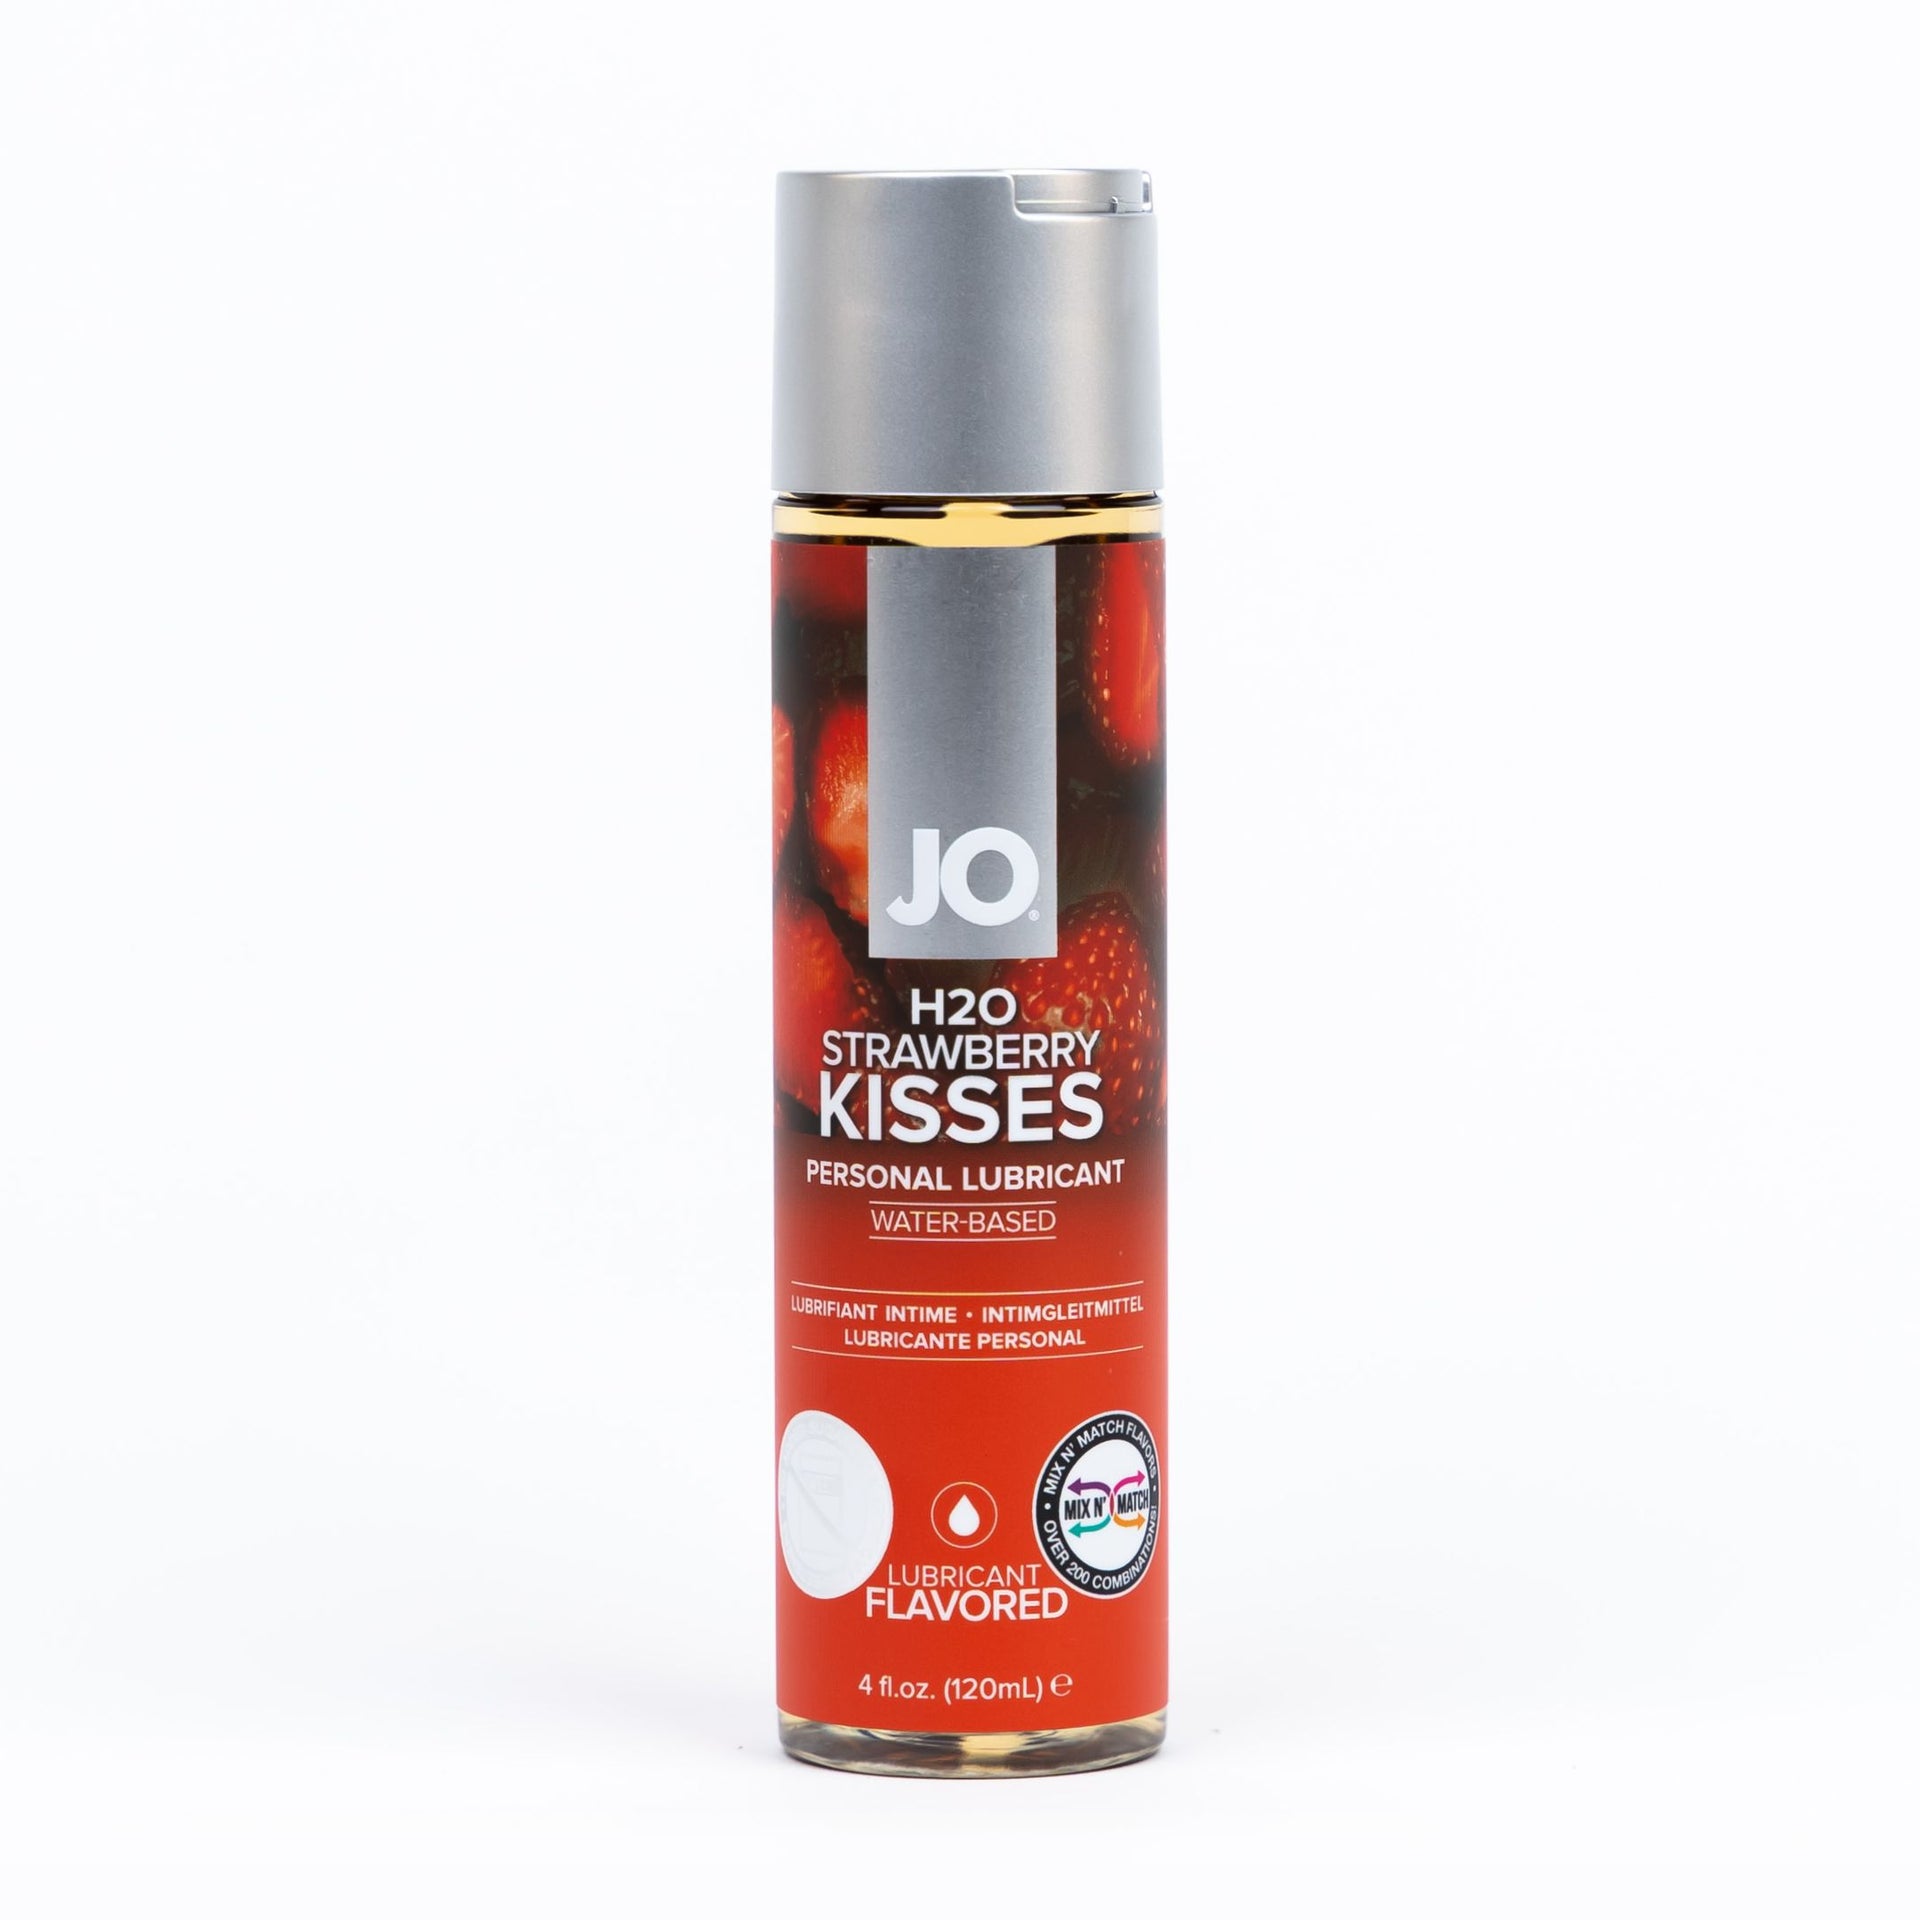 h20 strawberry kisses lubricant front of pack